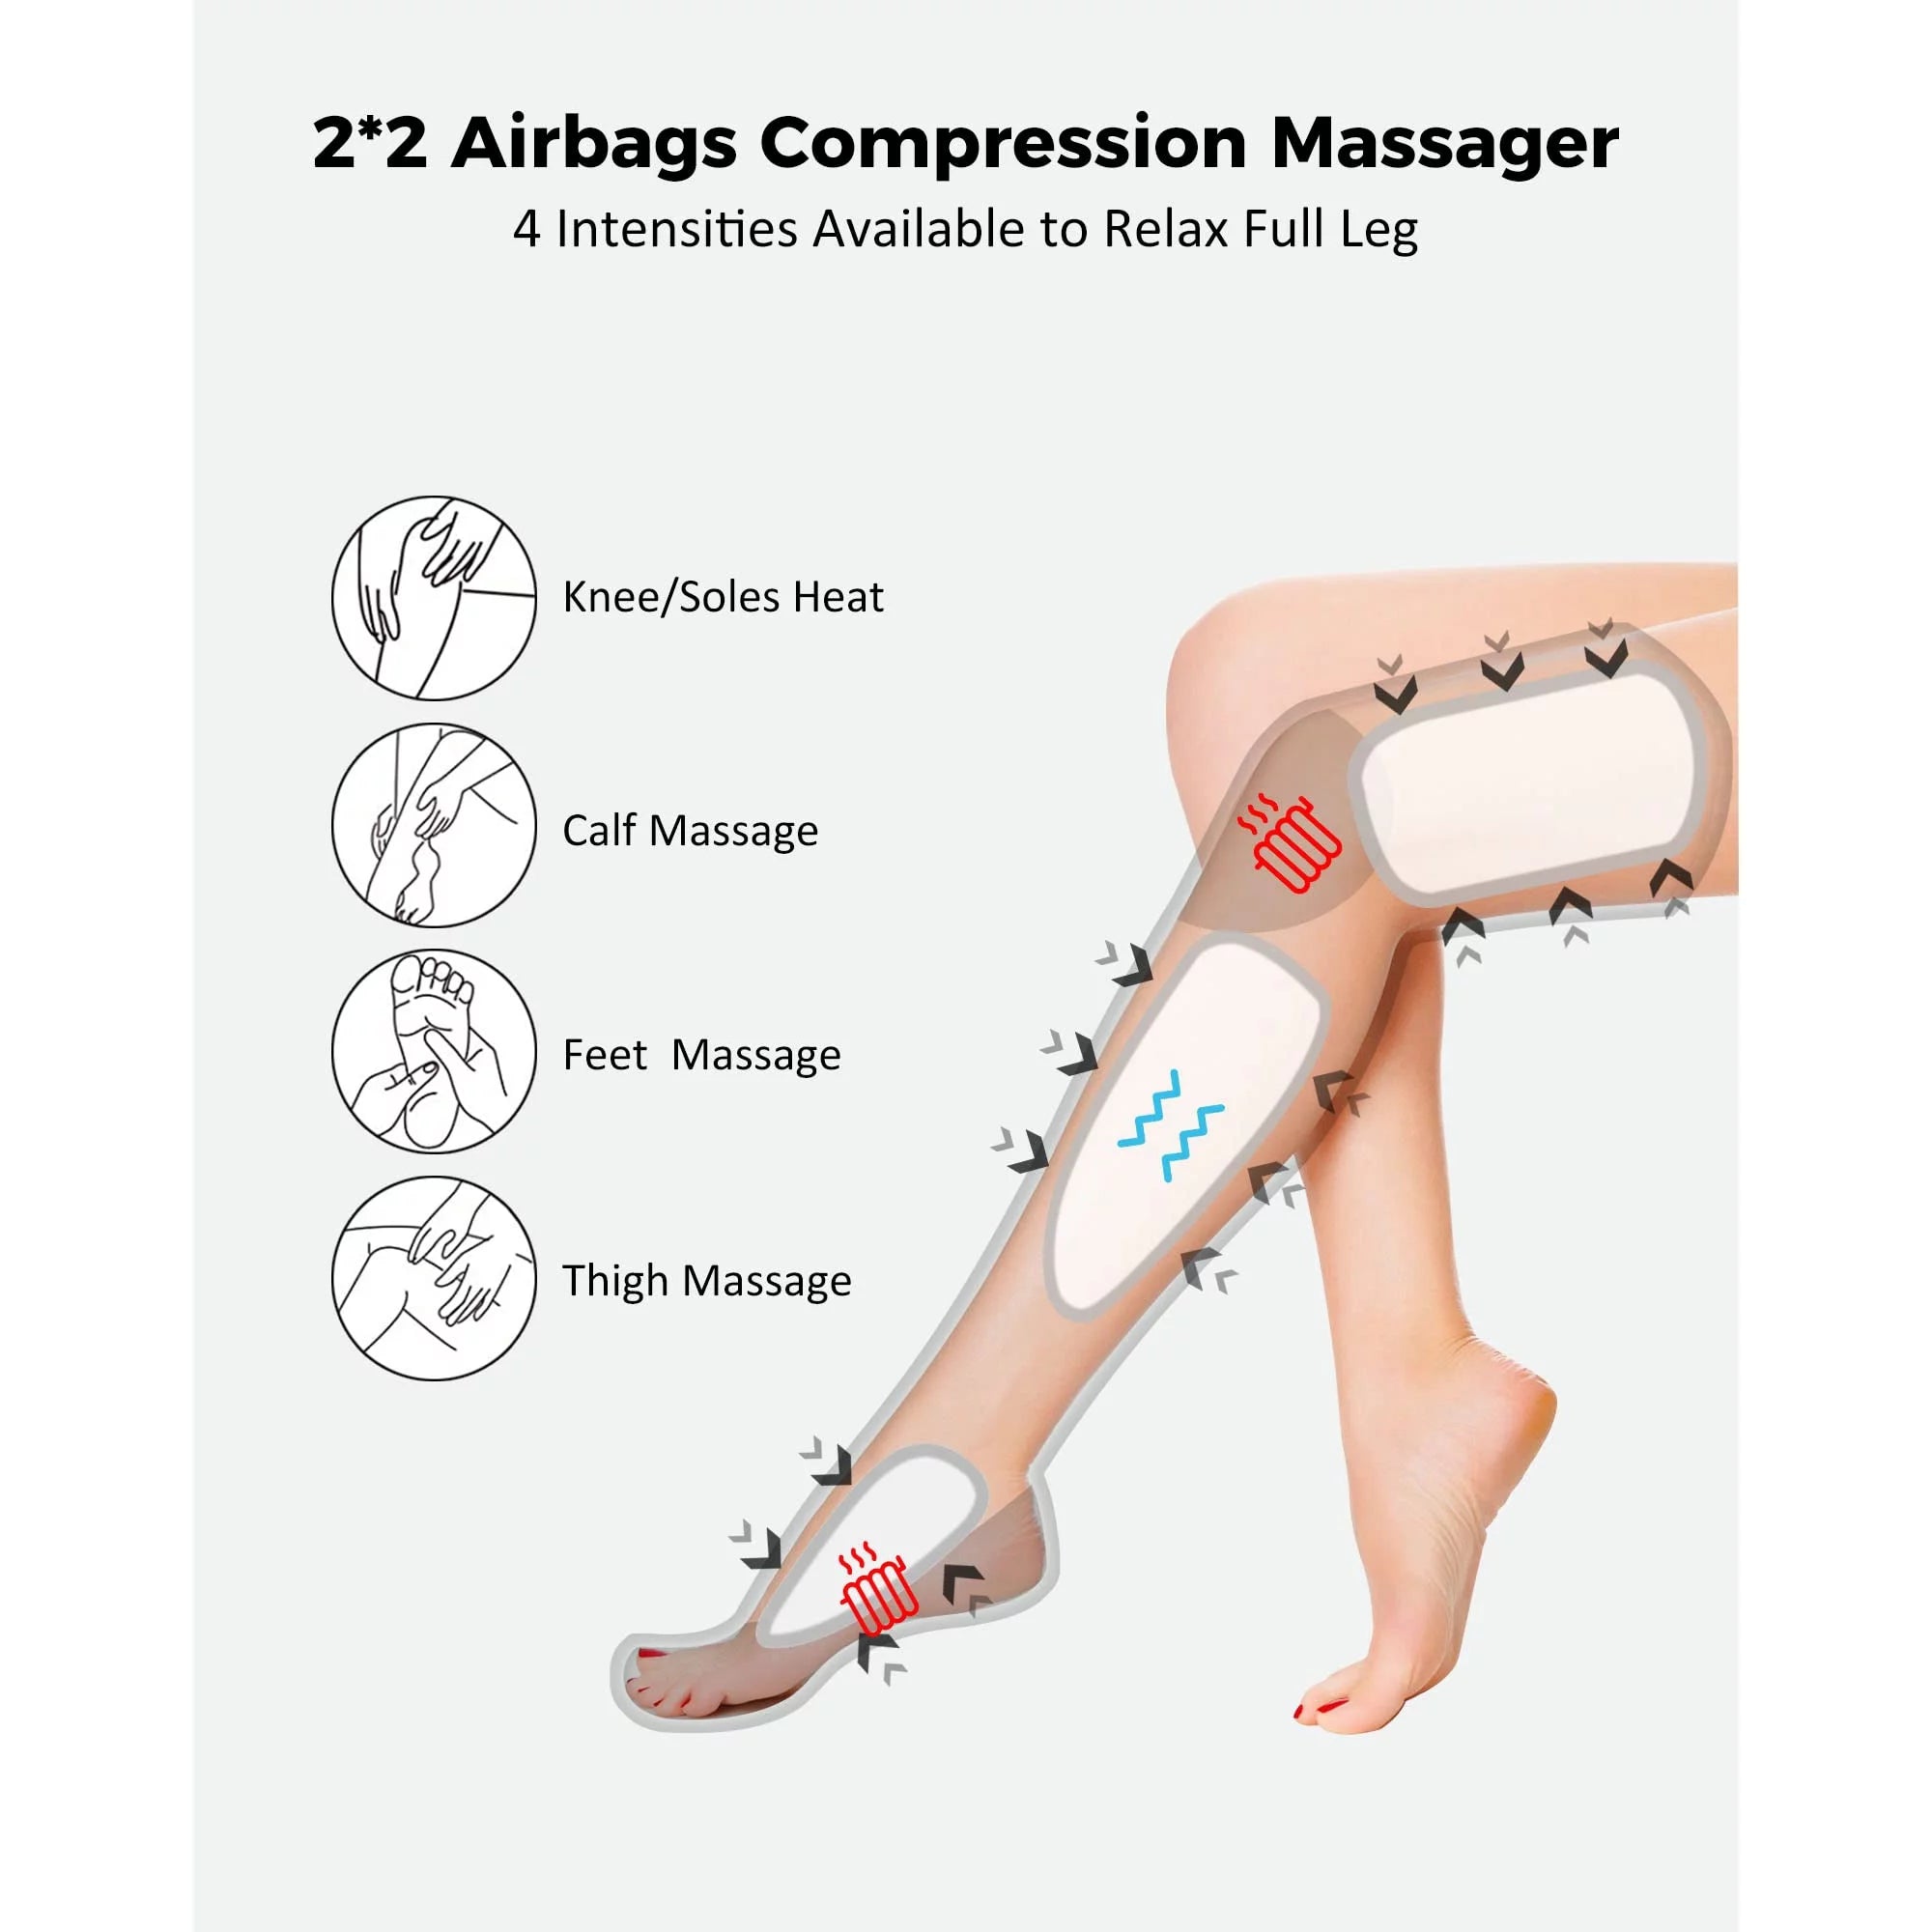 Leg Massager, Leg Air Compression Massager for Circulation and Pain Relief,2 Heat Levels Foot/Knee Massager,6 Modes with Memory Function Controller, Full Leg Massager, Gift for Women Men